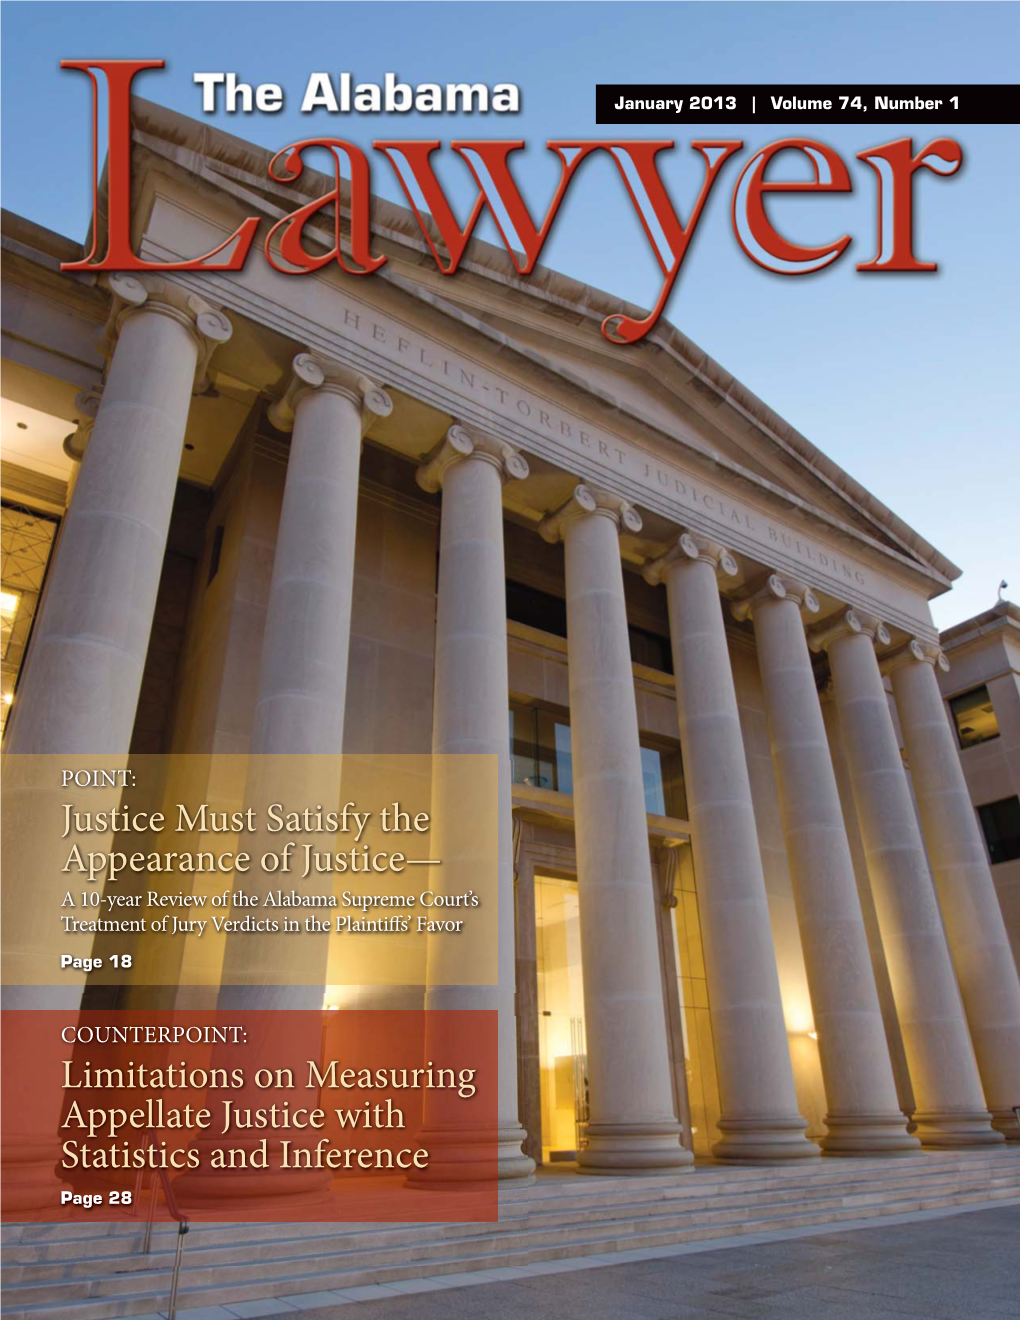 Limitations on Measuring Appellate Justice with Statistics and Inference